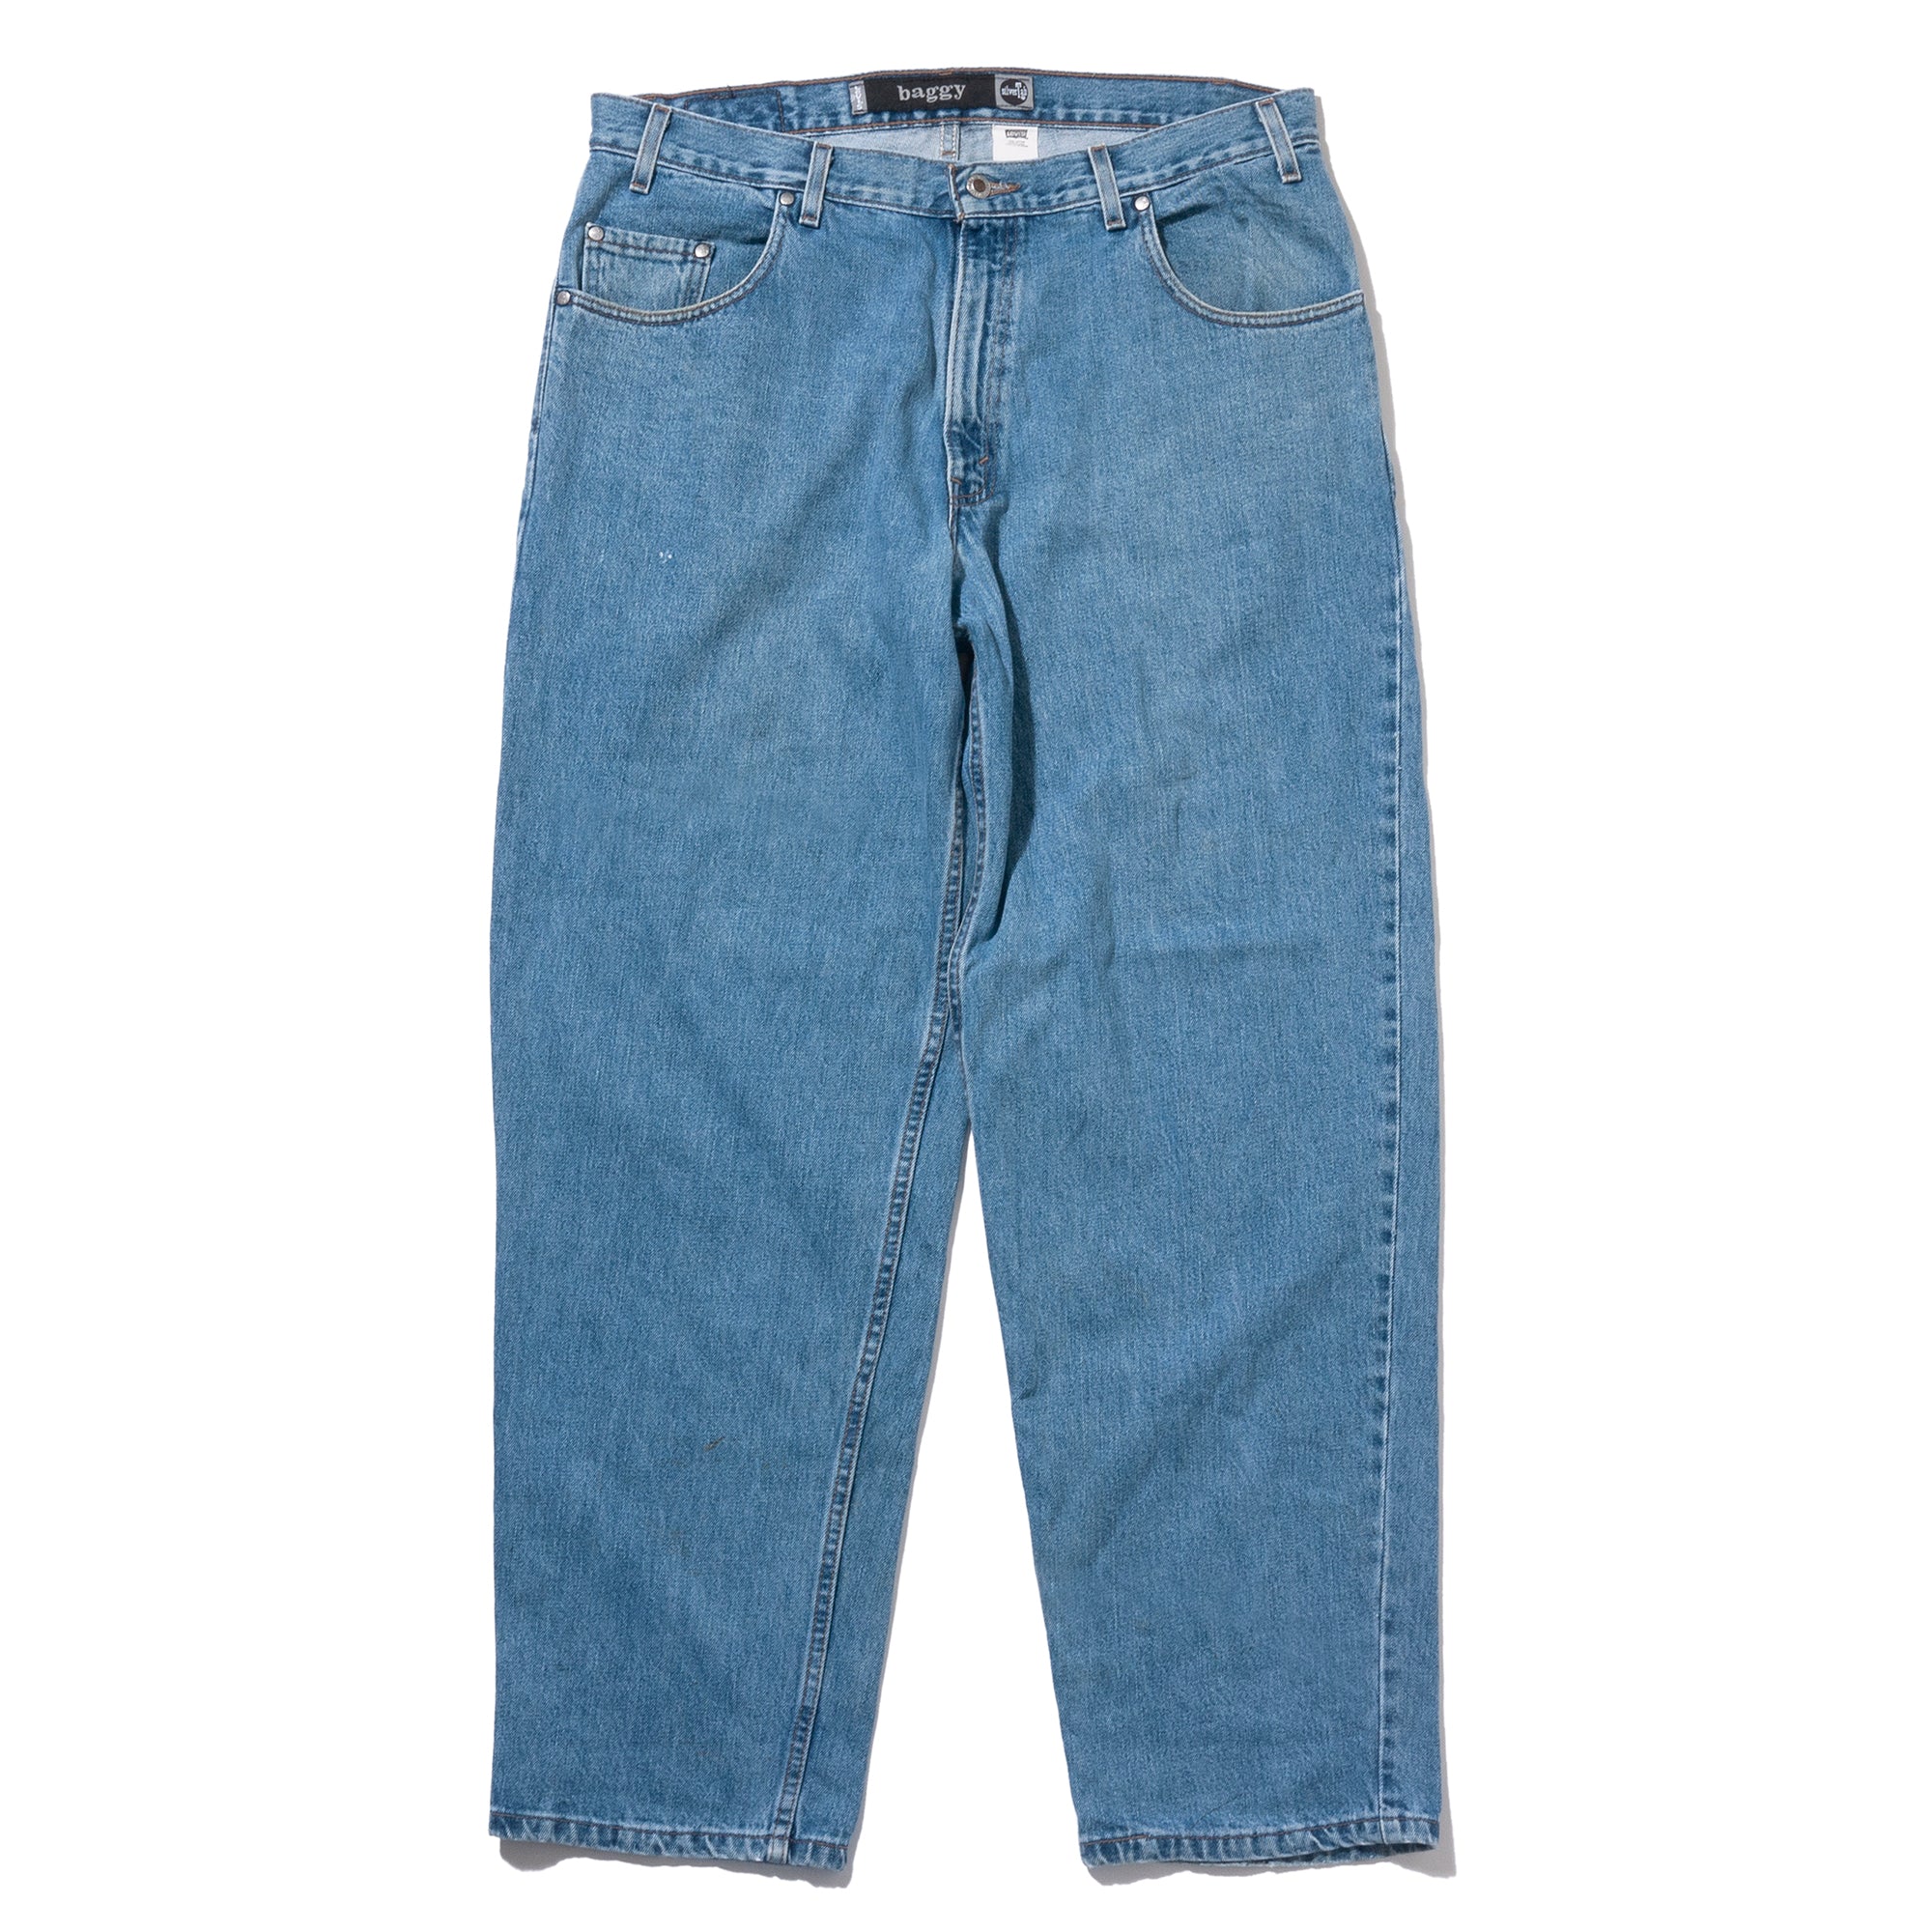 SilverTab Baggy Jeans #3